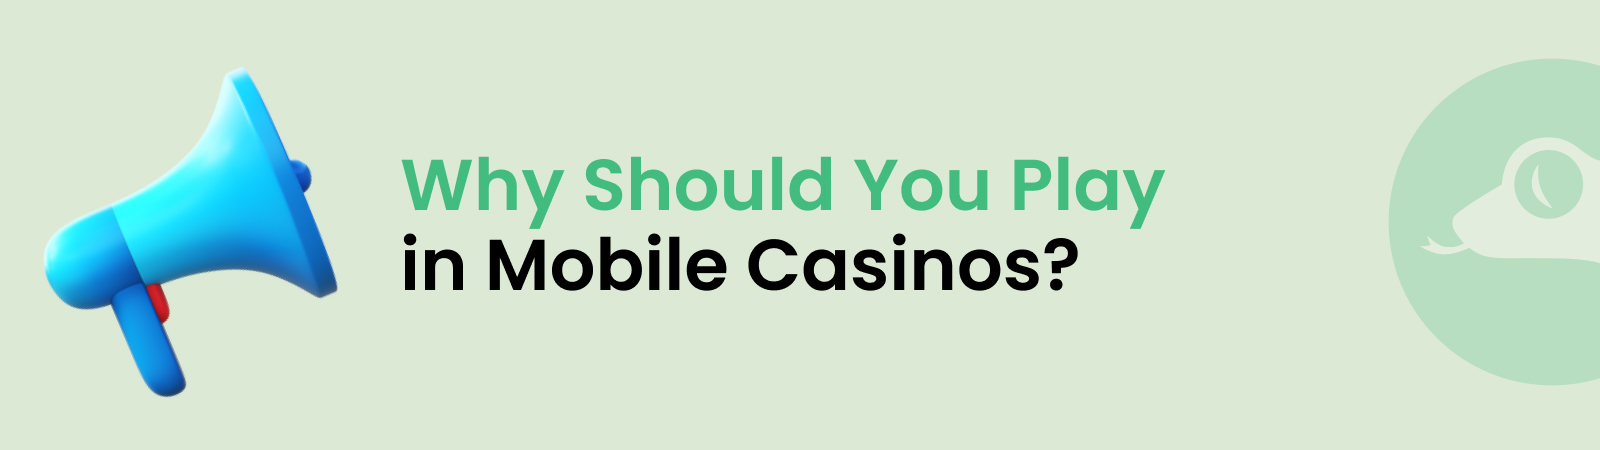 why should you play in mobile casinos